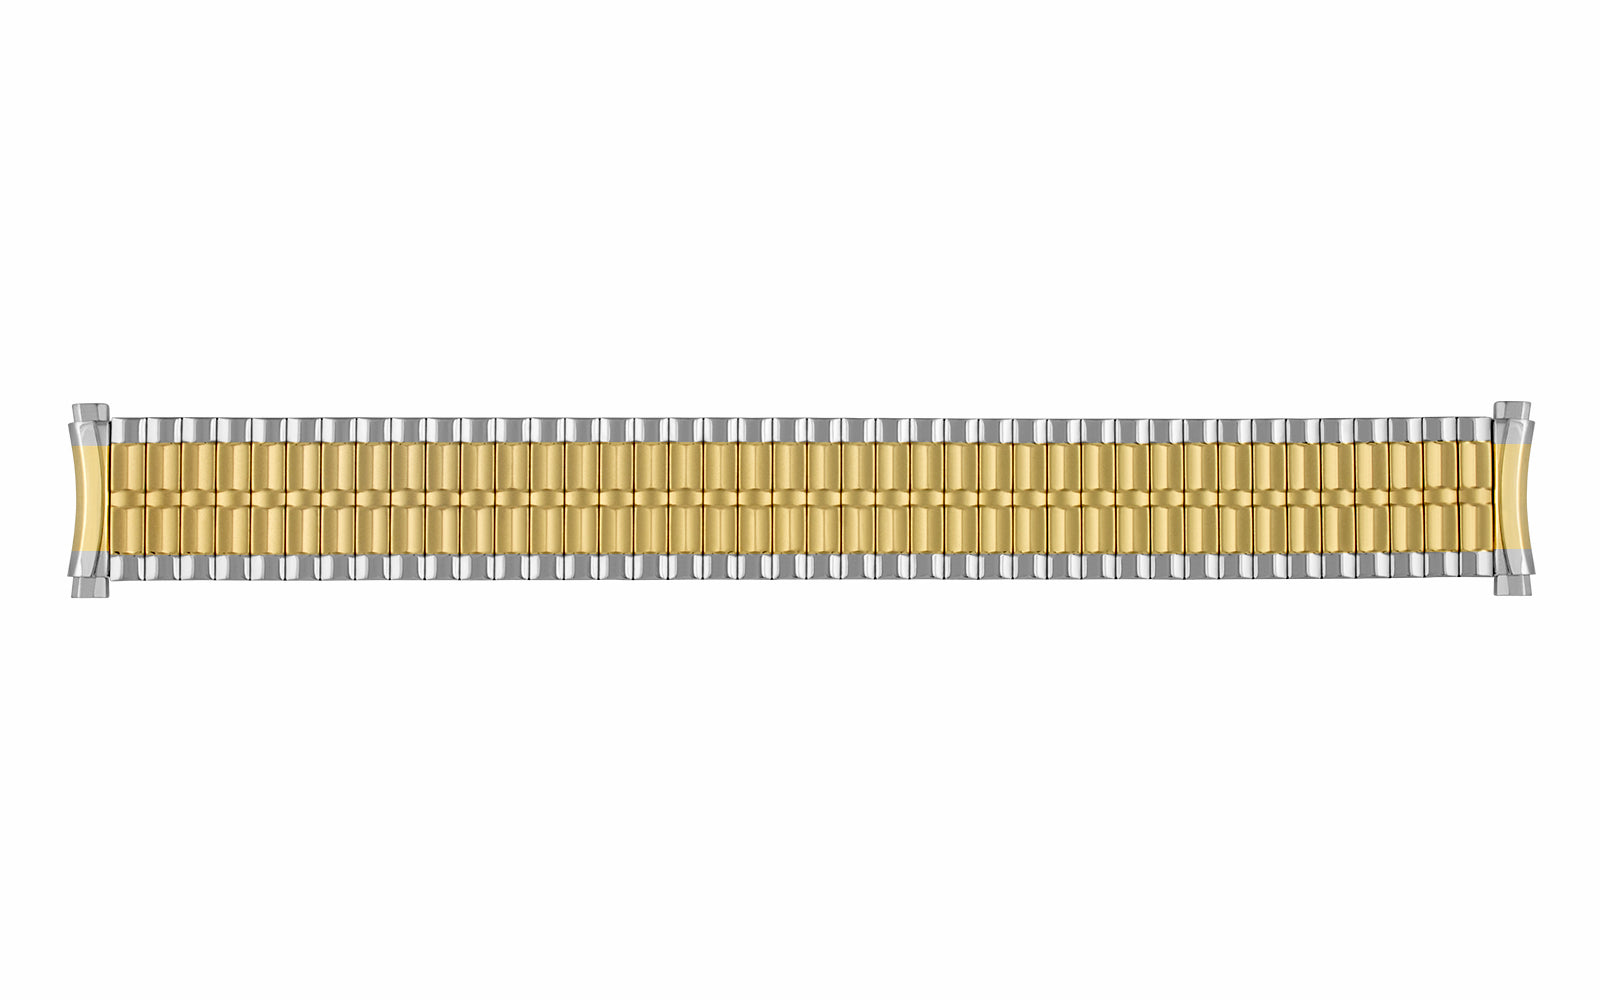 Watch band Em-MB009 22mm rose golden stainless steel expansion band  polished by EICHMUELLER